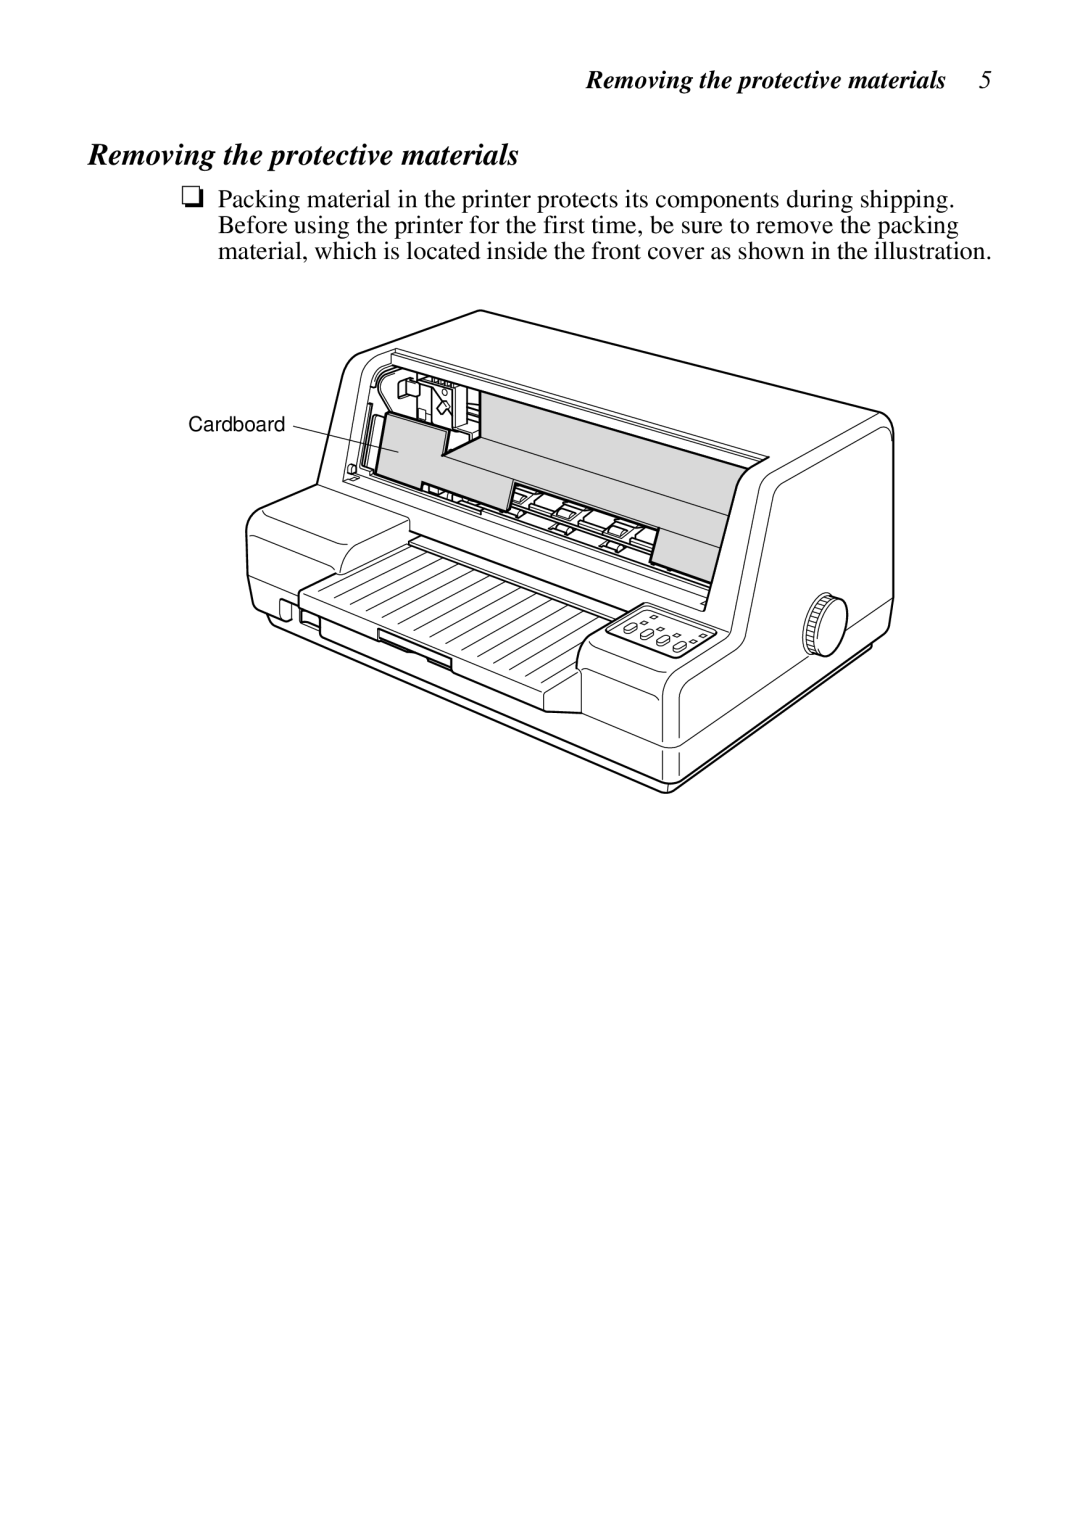 Star Micronics LC-8021 manual Removing the protective materials 